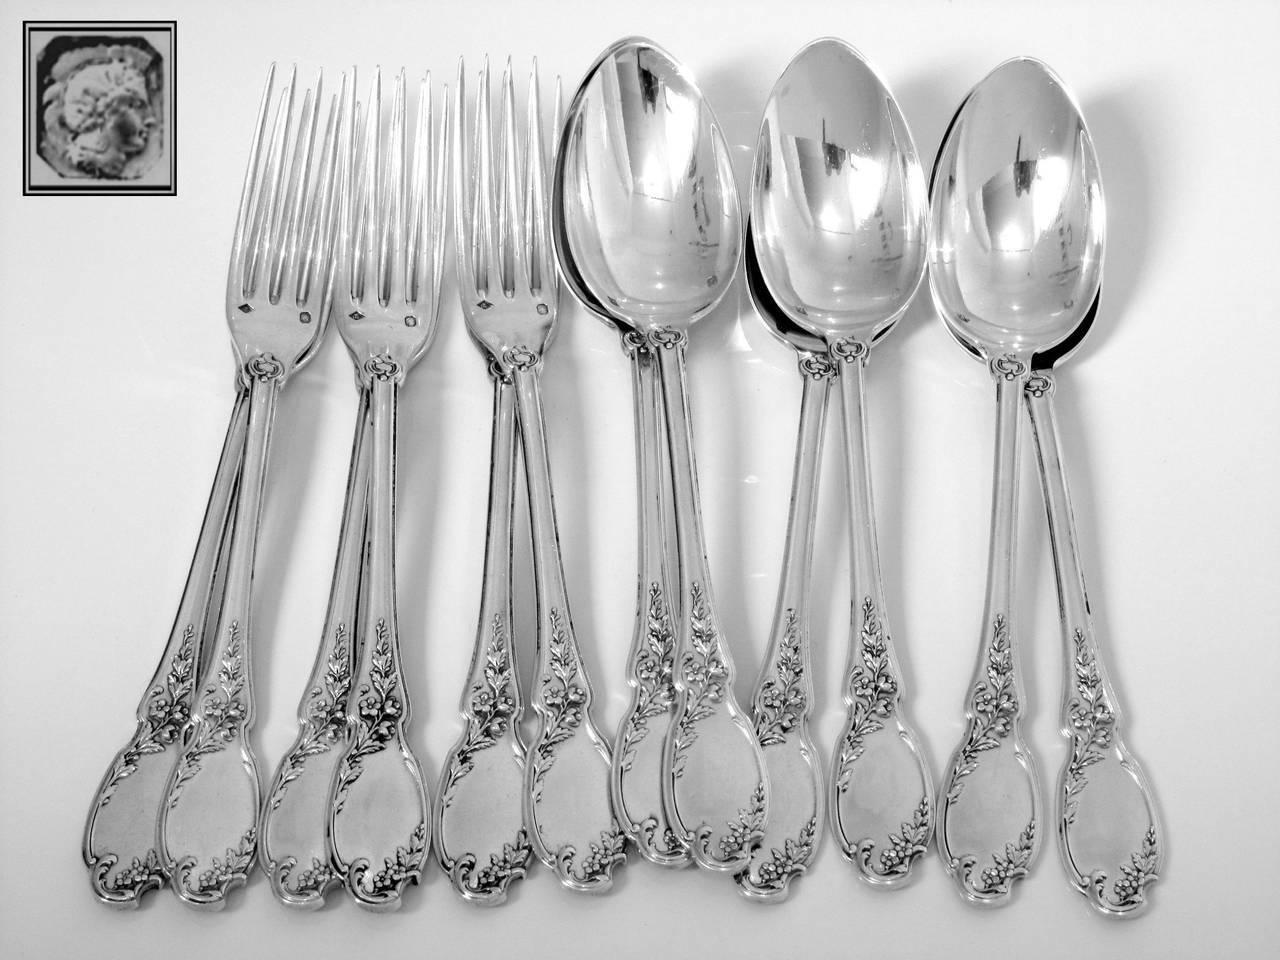 Late 19th Century Linzeler French Sterling Silver Dessert/Entremet Flatware Set 12 pc Rococo